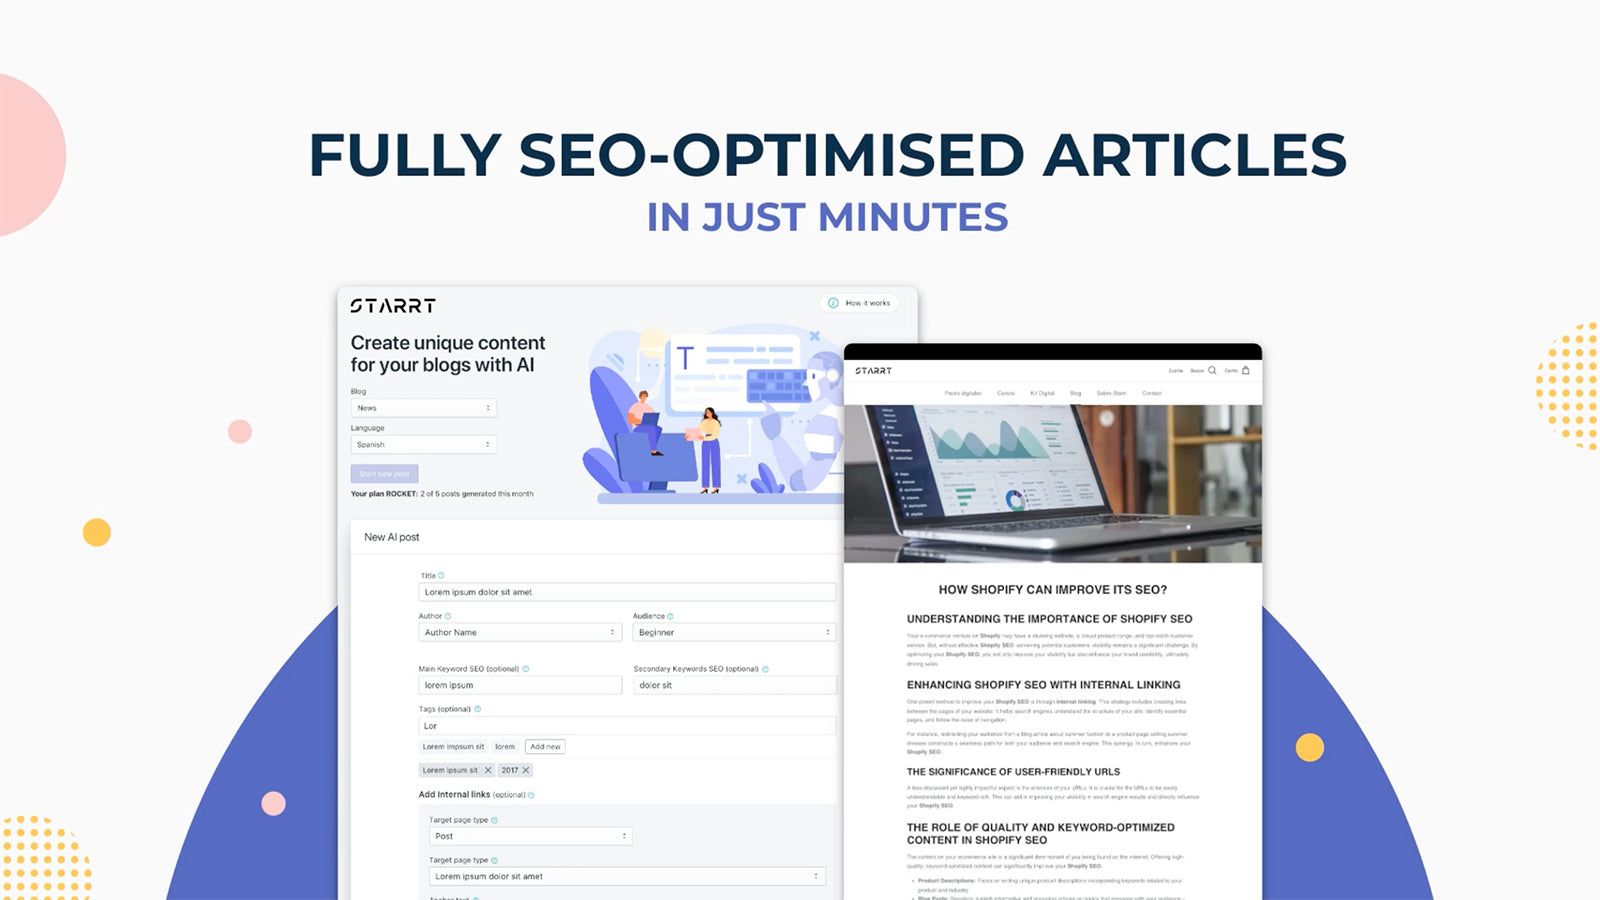 Fully SEO-optimised articles for your shop